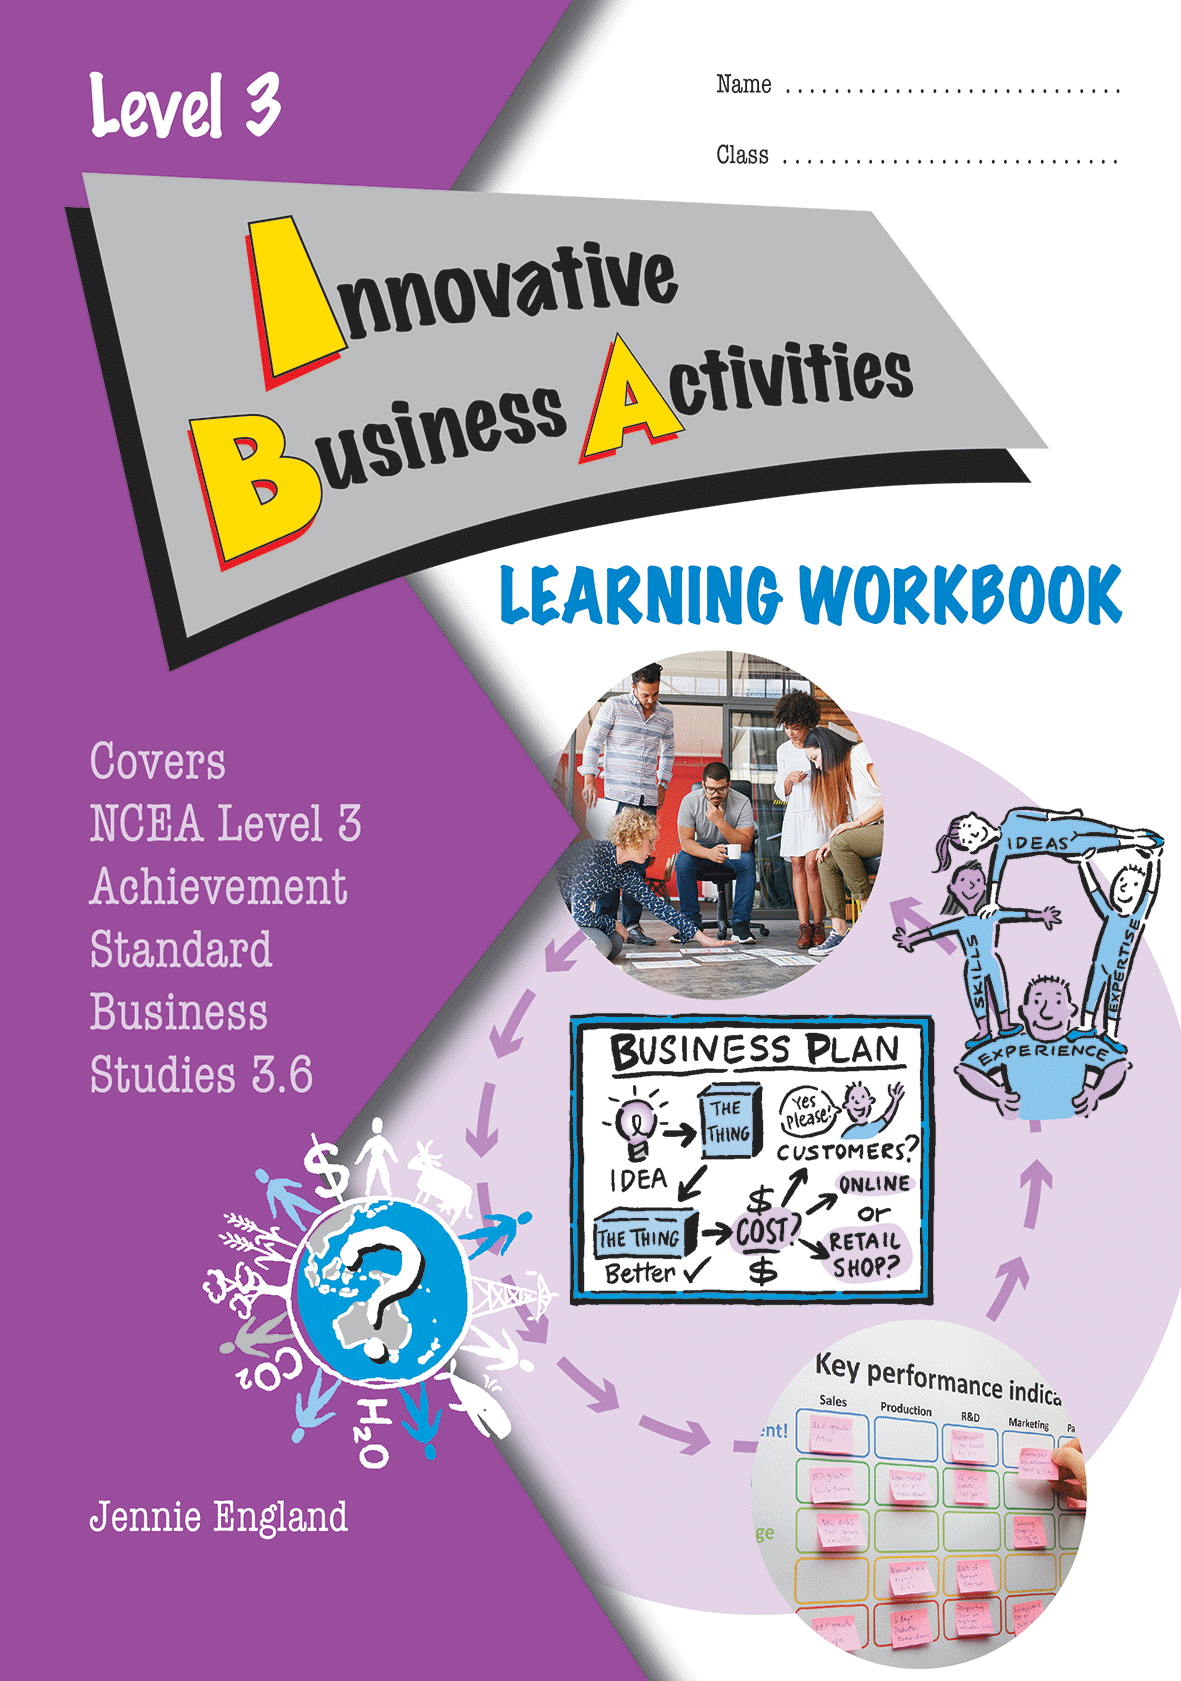 Level 3 Innovative Business Activities 3.6 Learning Workbook